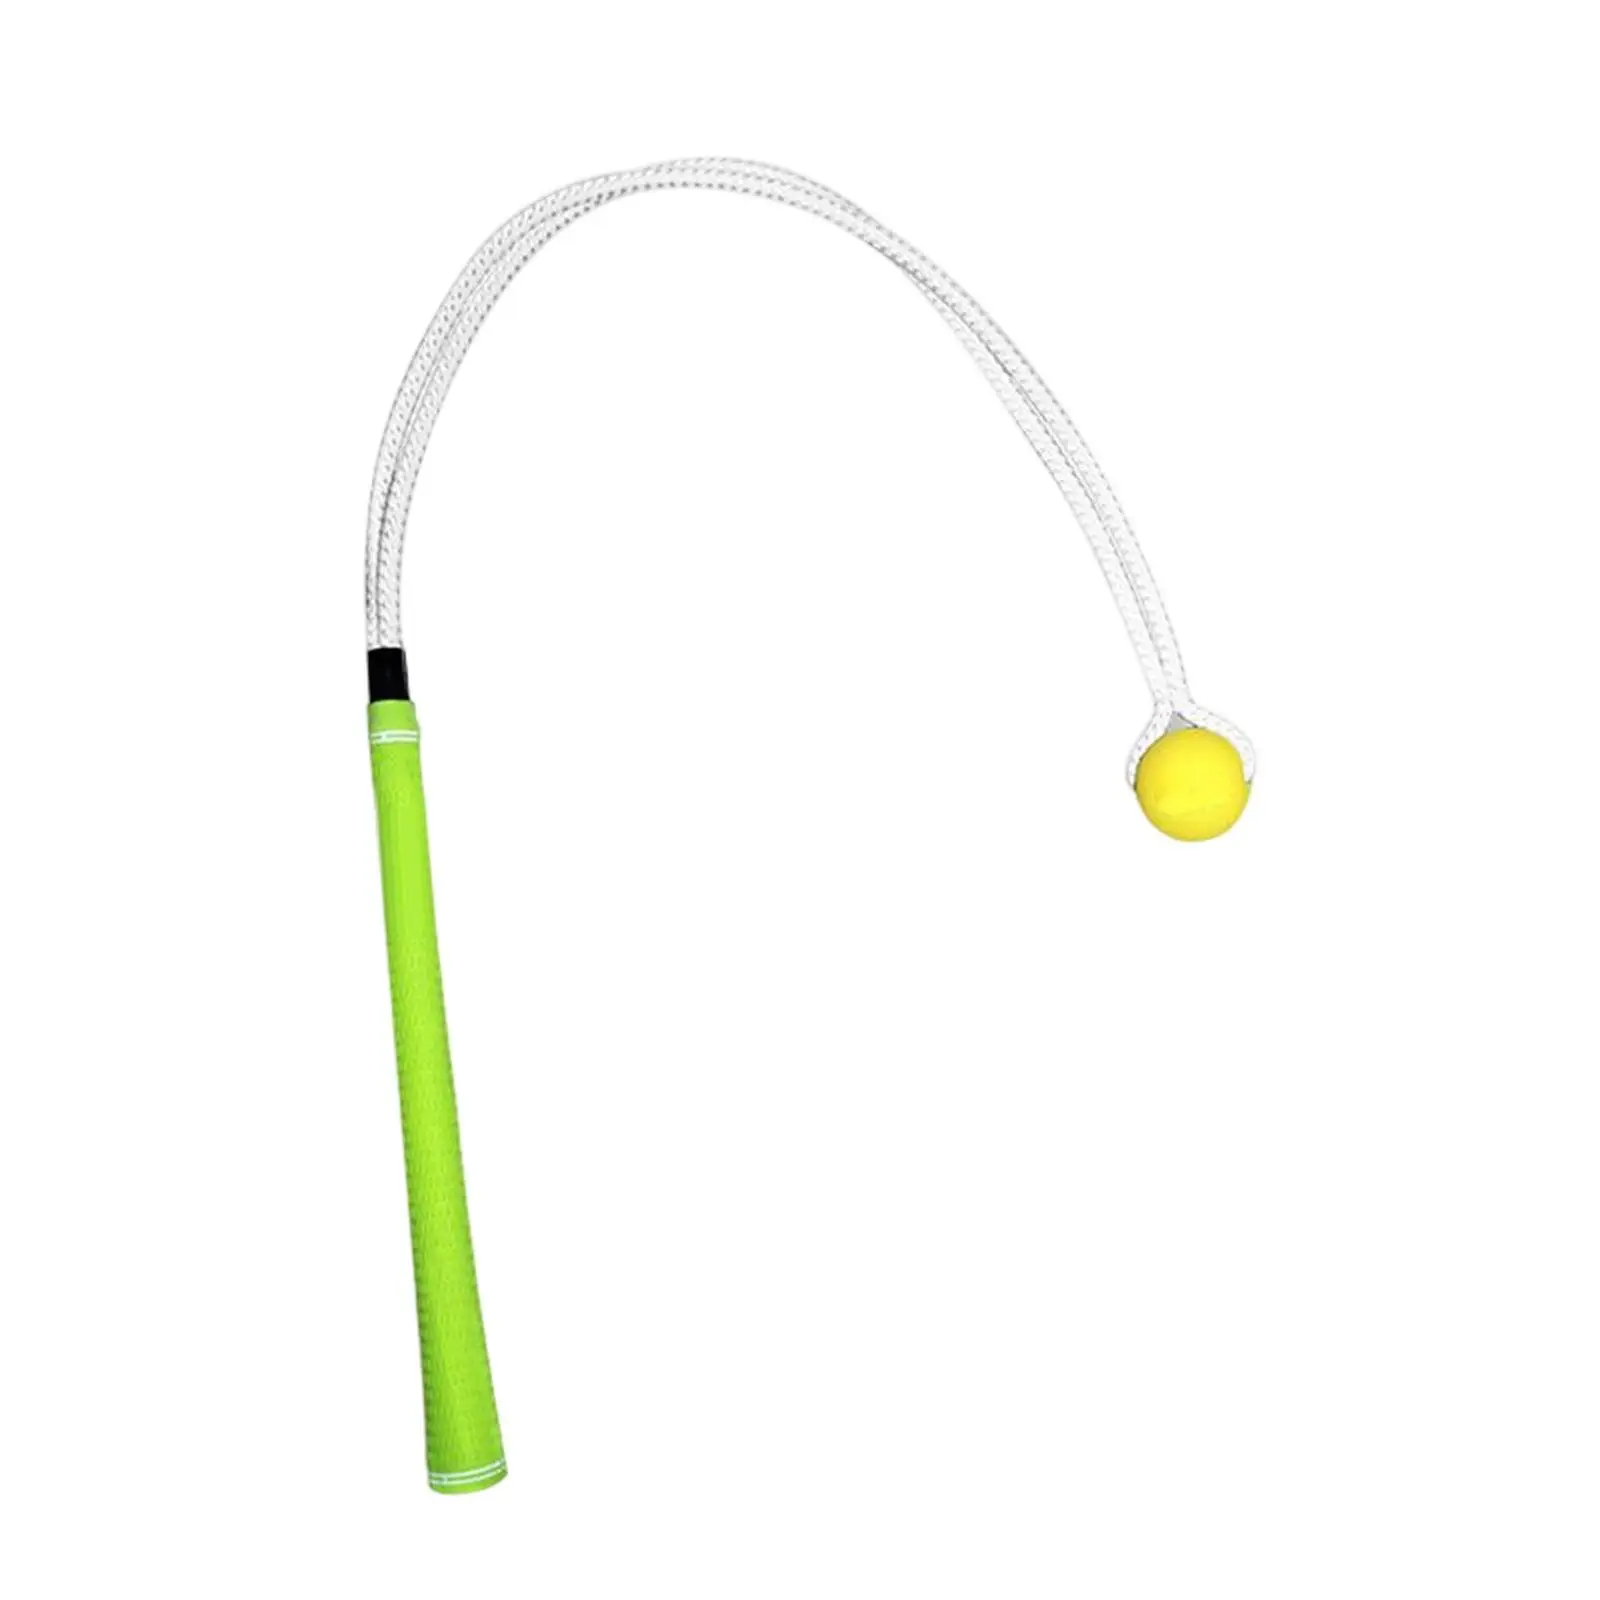 

Lightweight Warm up Rope Position Correction Comfortable Grip Swing Trainer Aid for Speed Improved Tempo Balance Rhythm